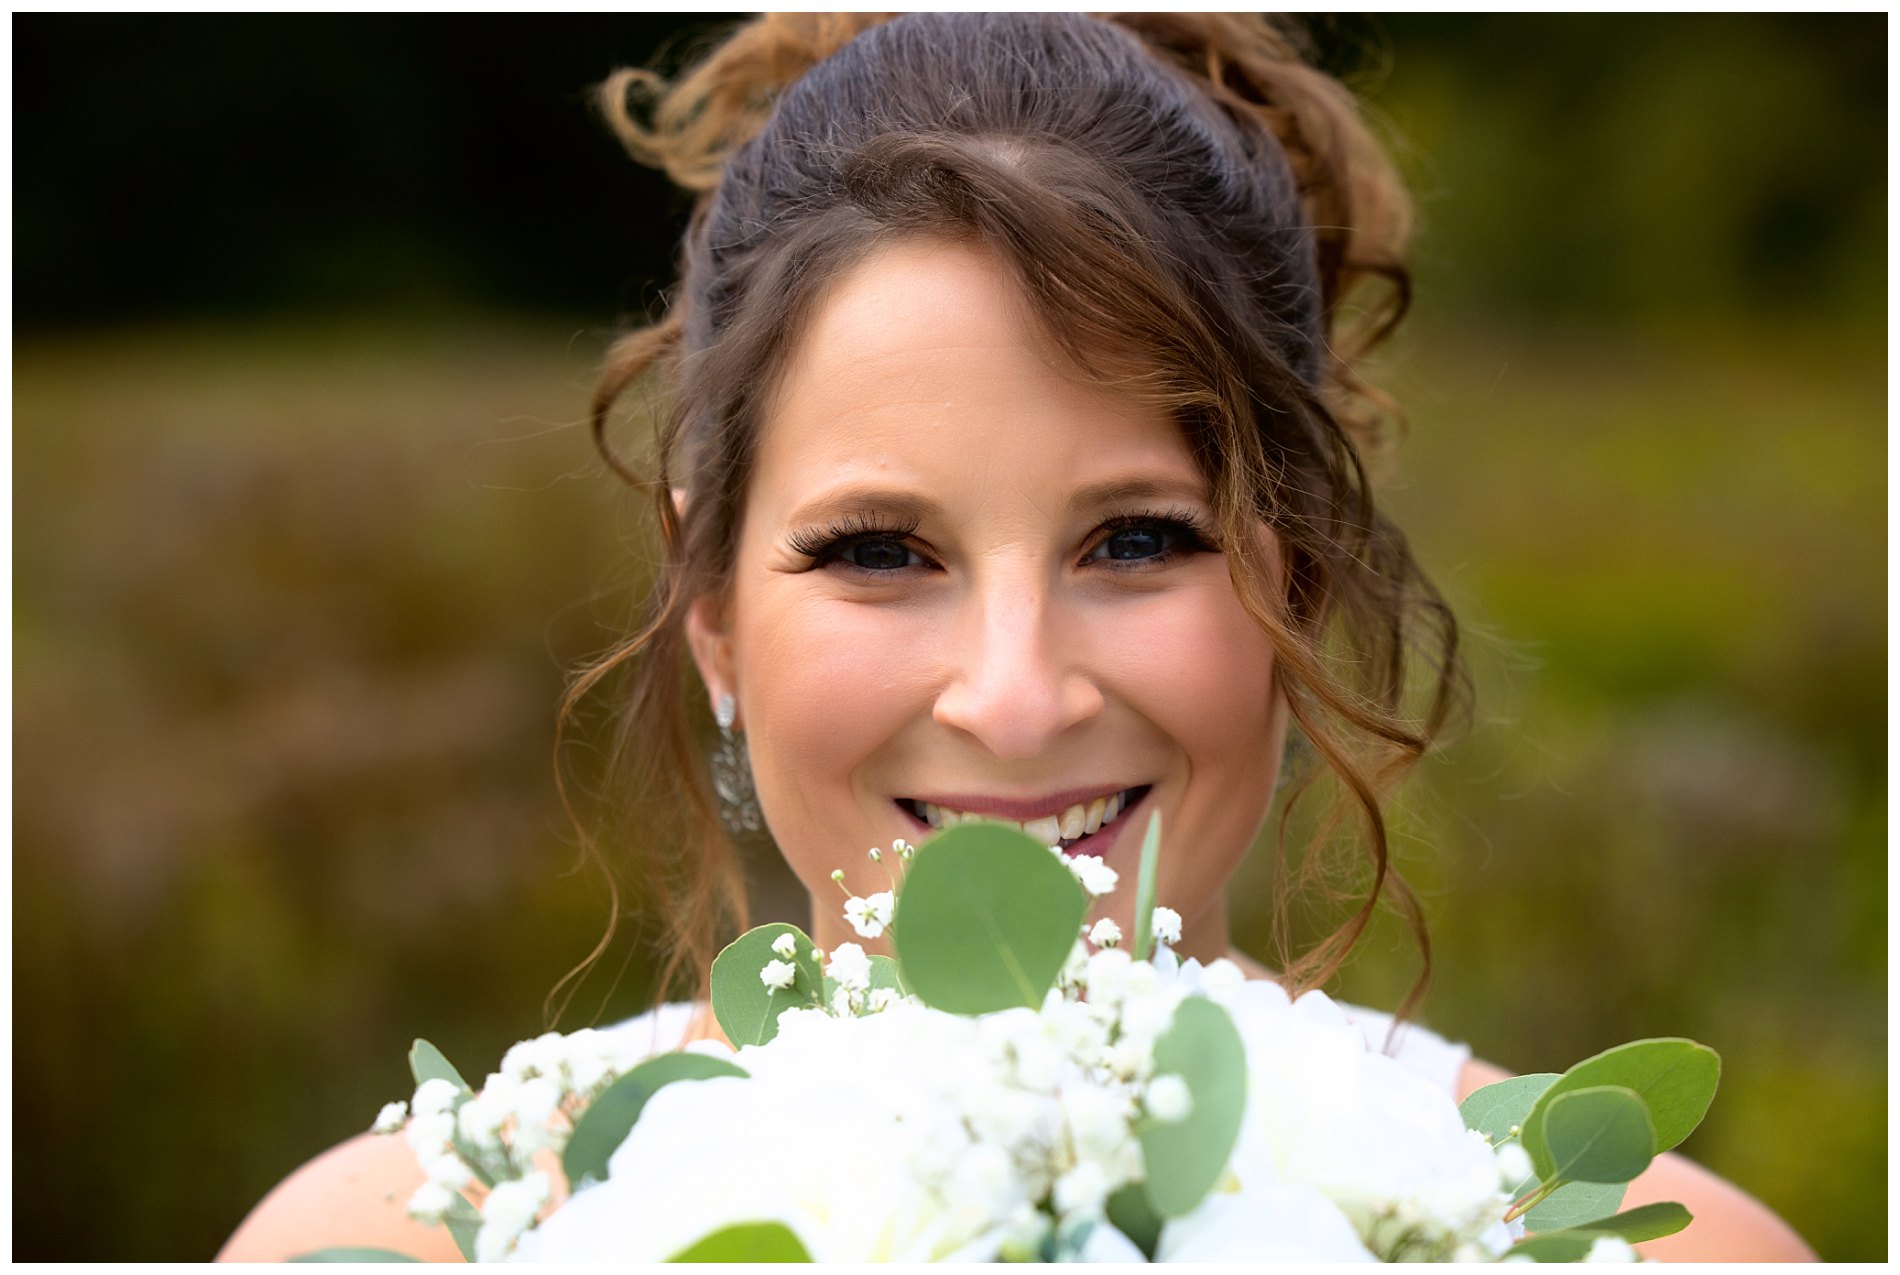 Bride emily and her bouquet on wedding dayl